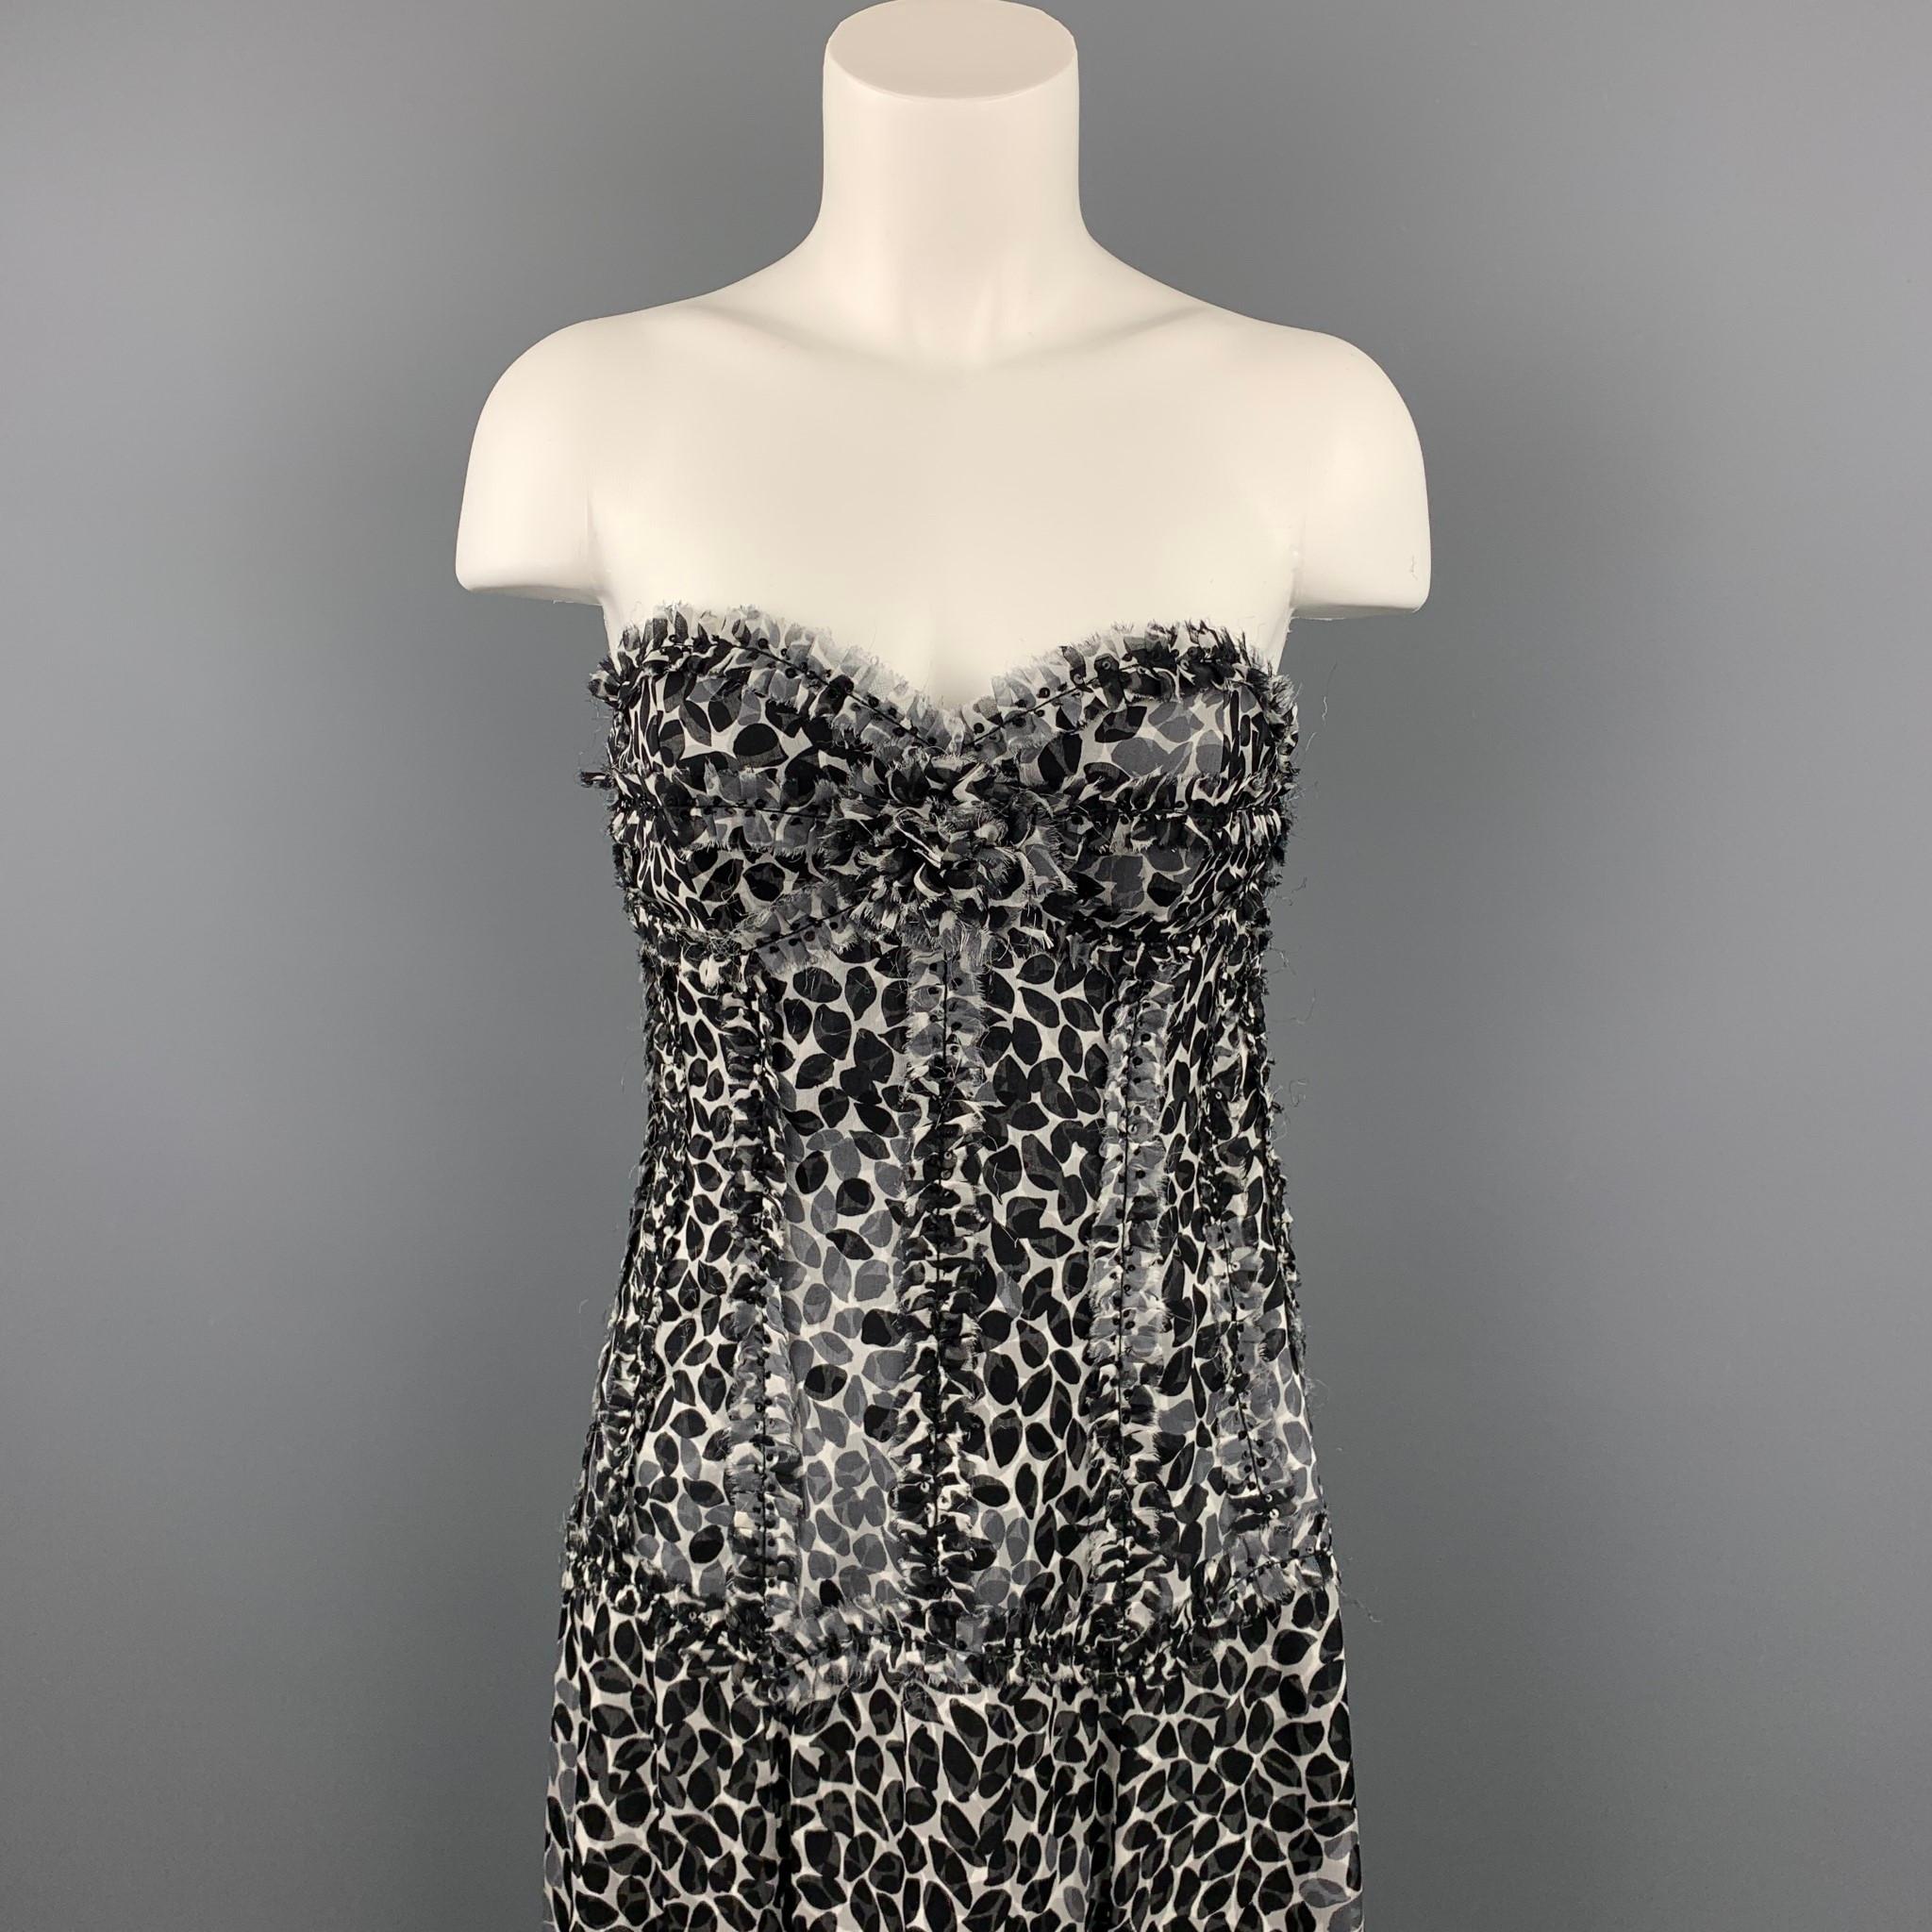 LIANCARLO gown comes in a black & white chiffon silk with a slip liner featuring a strapless style, sequined details, slit design, a-line skirt, and a side zipper closure. Made in USA.

Very Good Pre-Owned Condition.
Marked:

Measurements:

Bust: 30